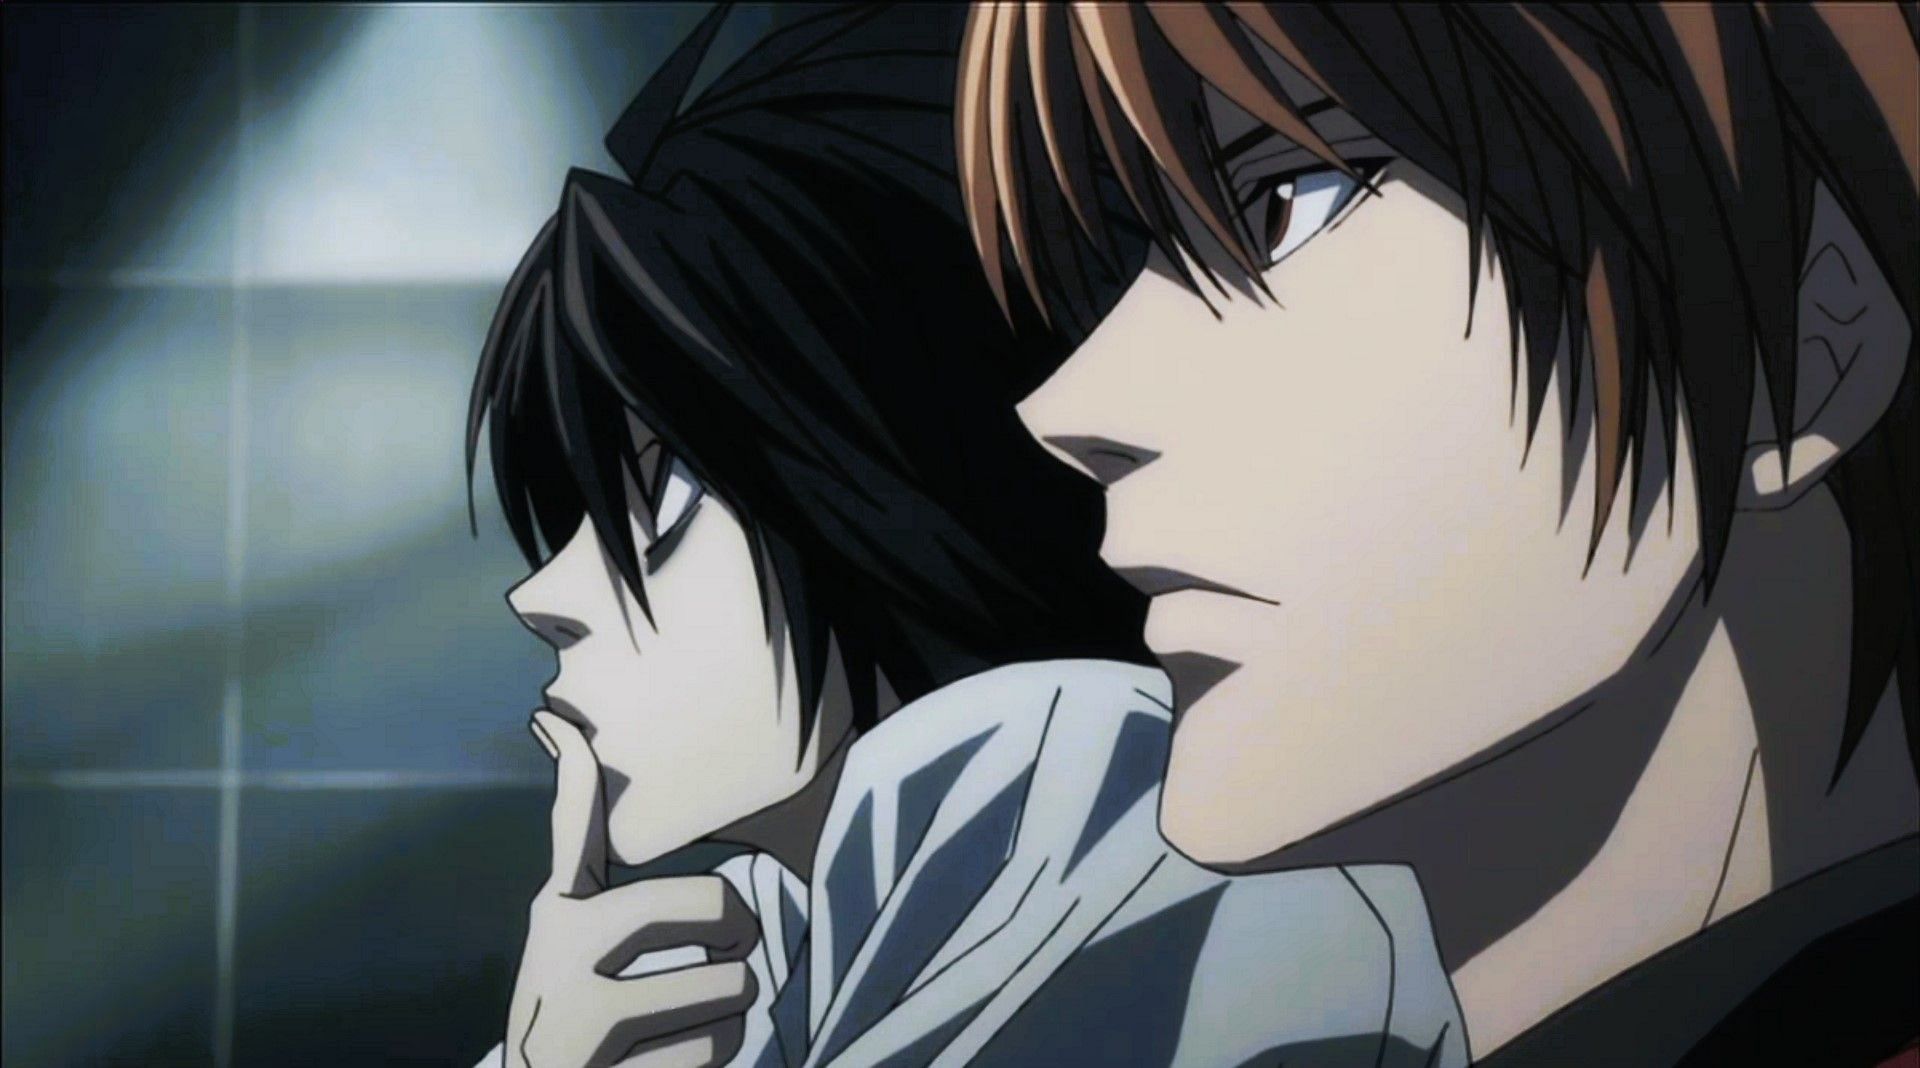 L and Kira from Death Note (Image via Madhouse)